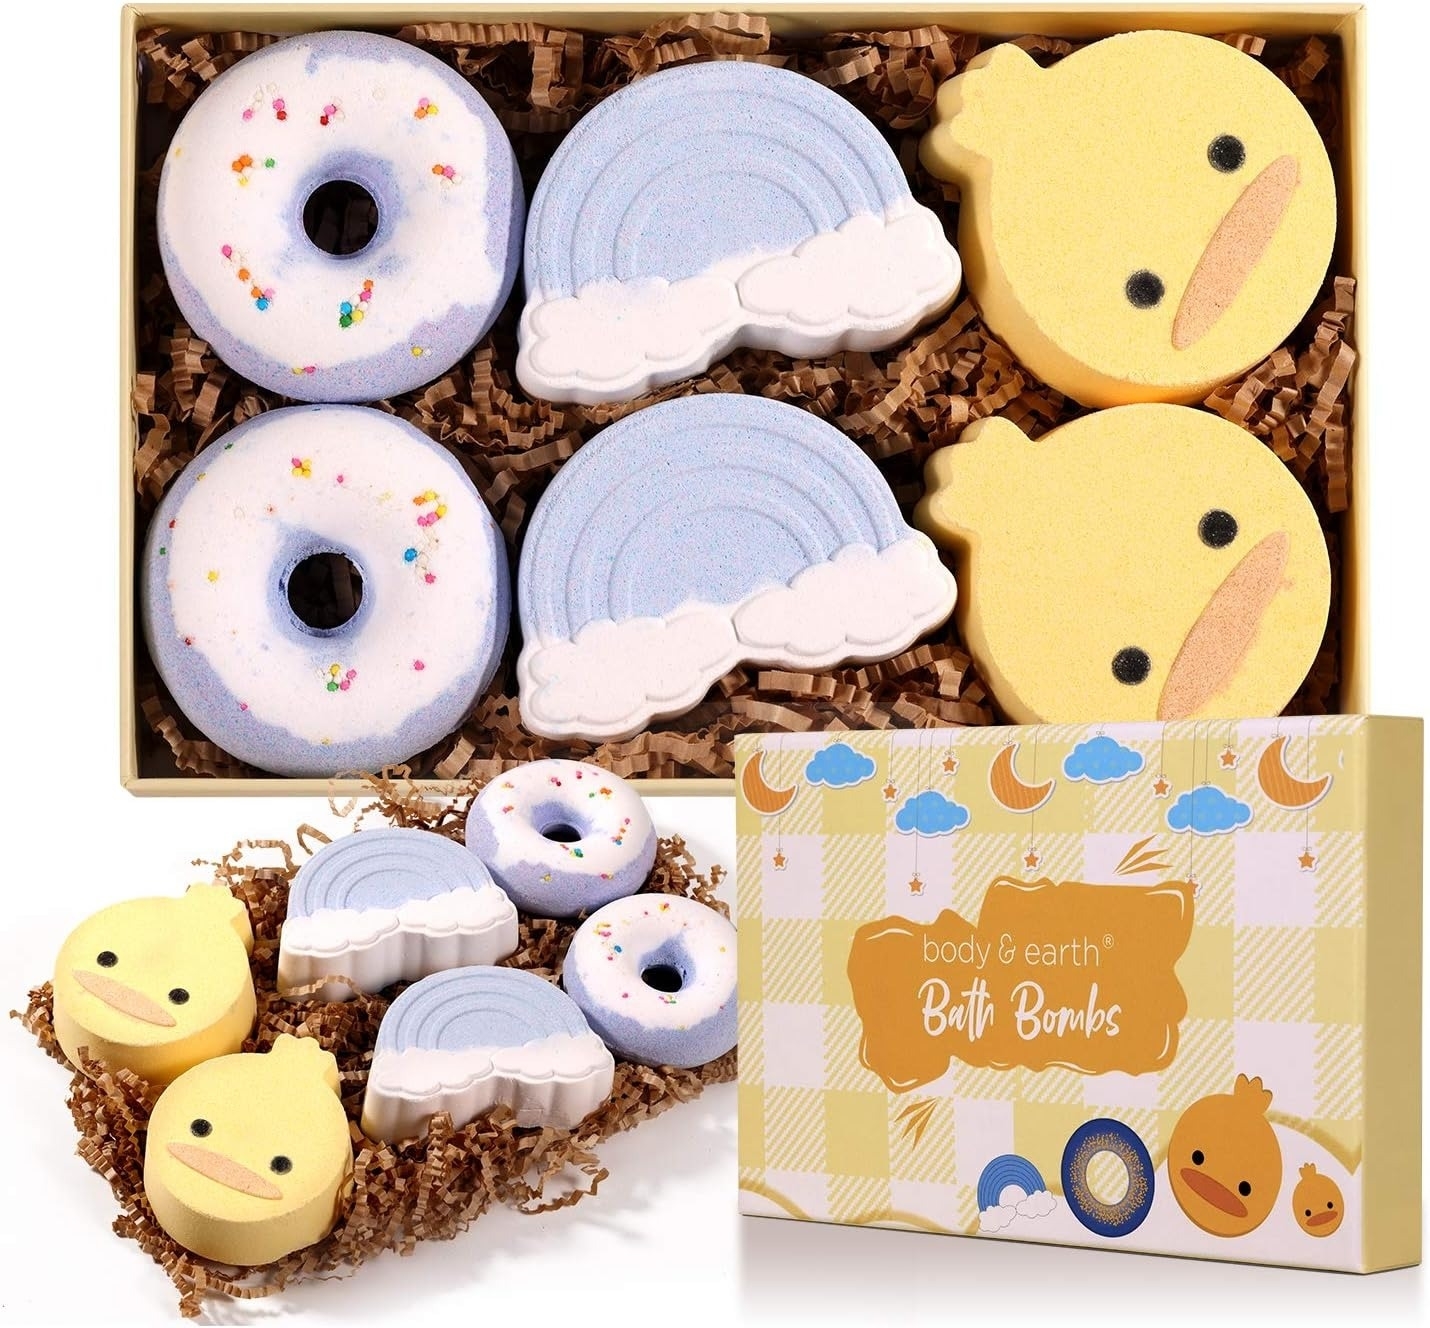 duck, cloud, and donut-shaped bath bombs